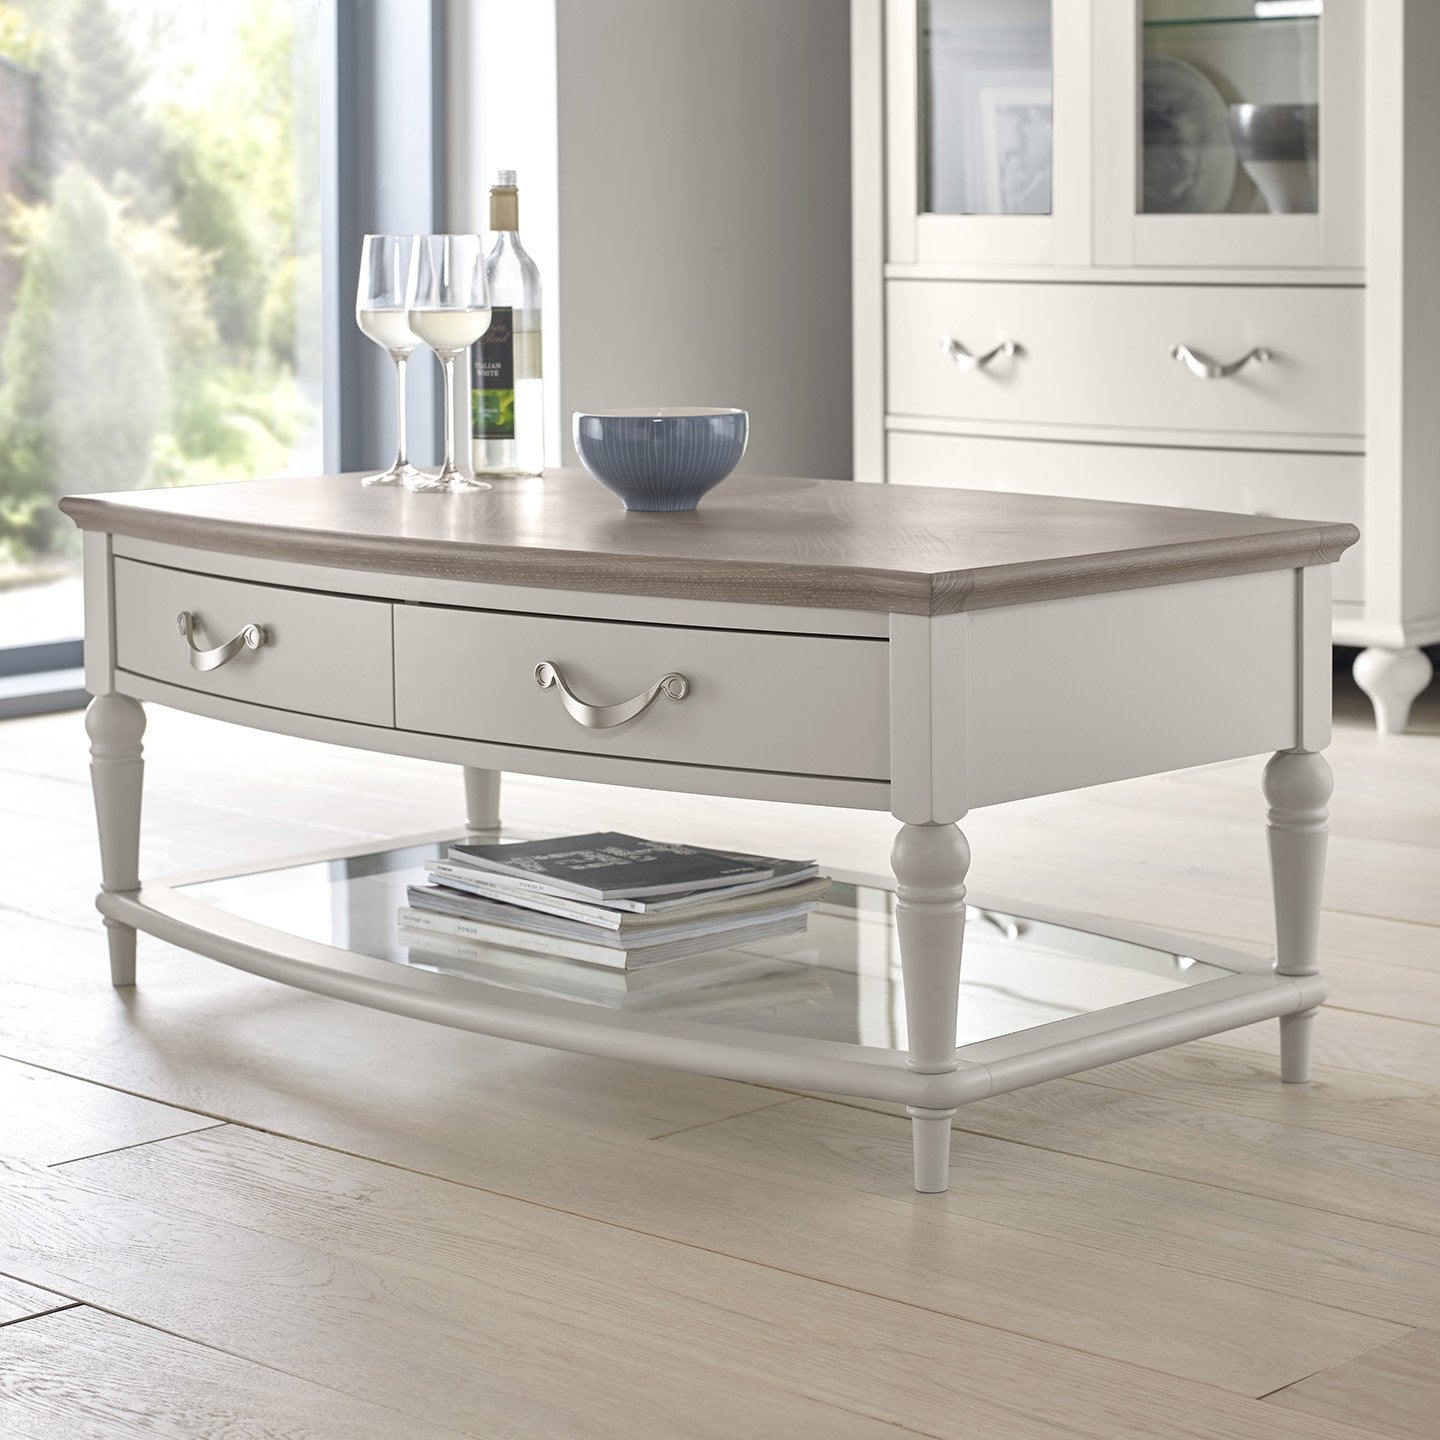 Montreux Coffee Table - Soft Grey from Upstairs Downstairs Furniture in Lisburn, Monaghan and Enniskillen